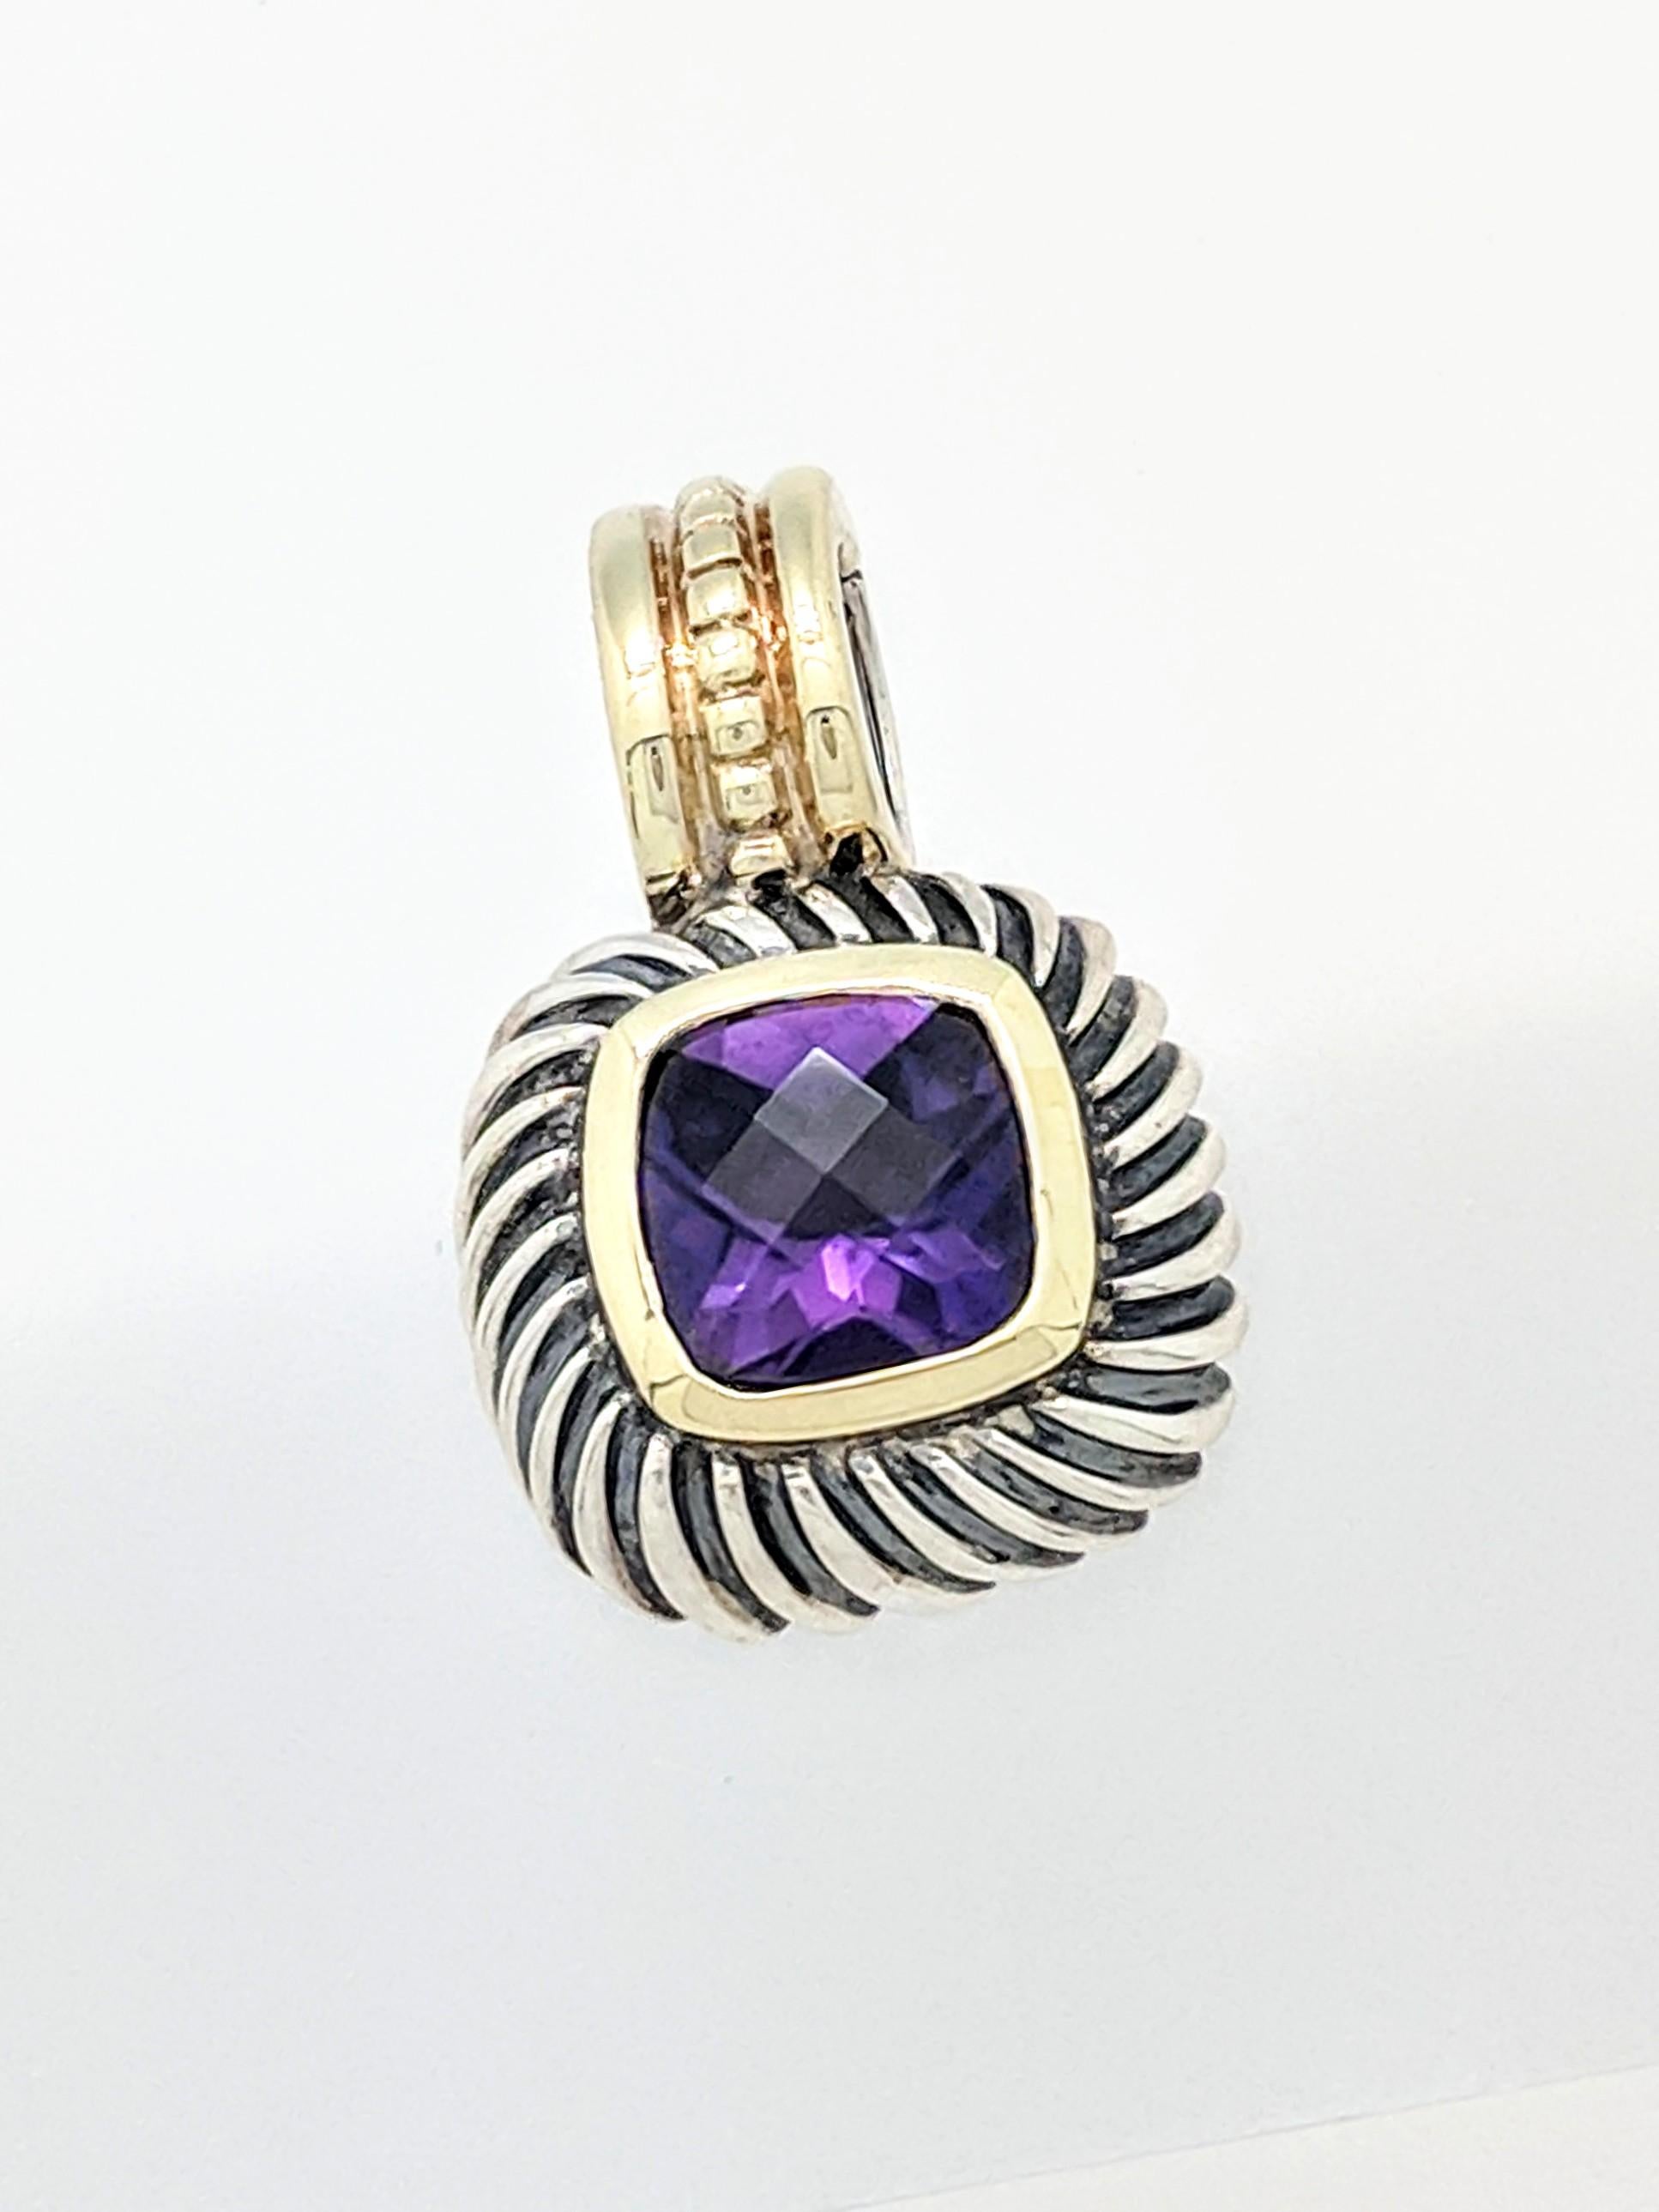 David Yurman Sterling Silver & 14K Yellow Gold Amethyst Albion Pendant Enhancer

You are viewing an Authentic David Yurman Sterling Silver & 14K Yellow Gold Amethyst Albion Pendant Enhancer. The pendant holds one approximately 7mm by 7mm faceted